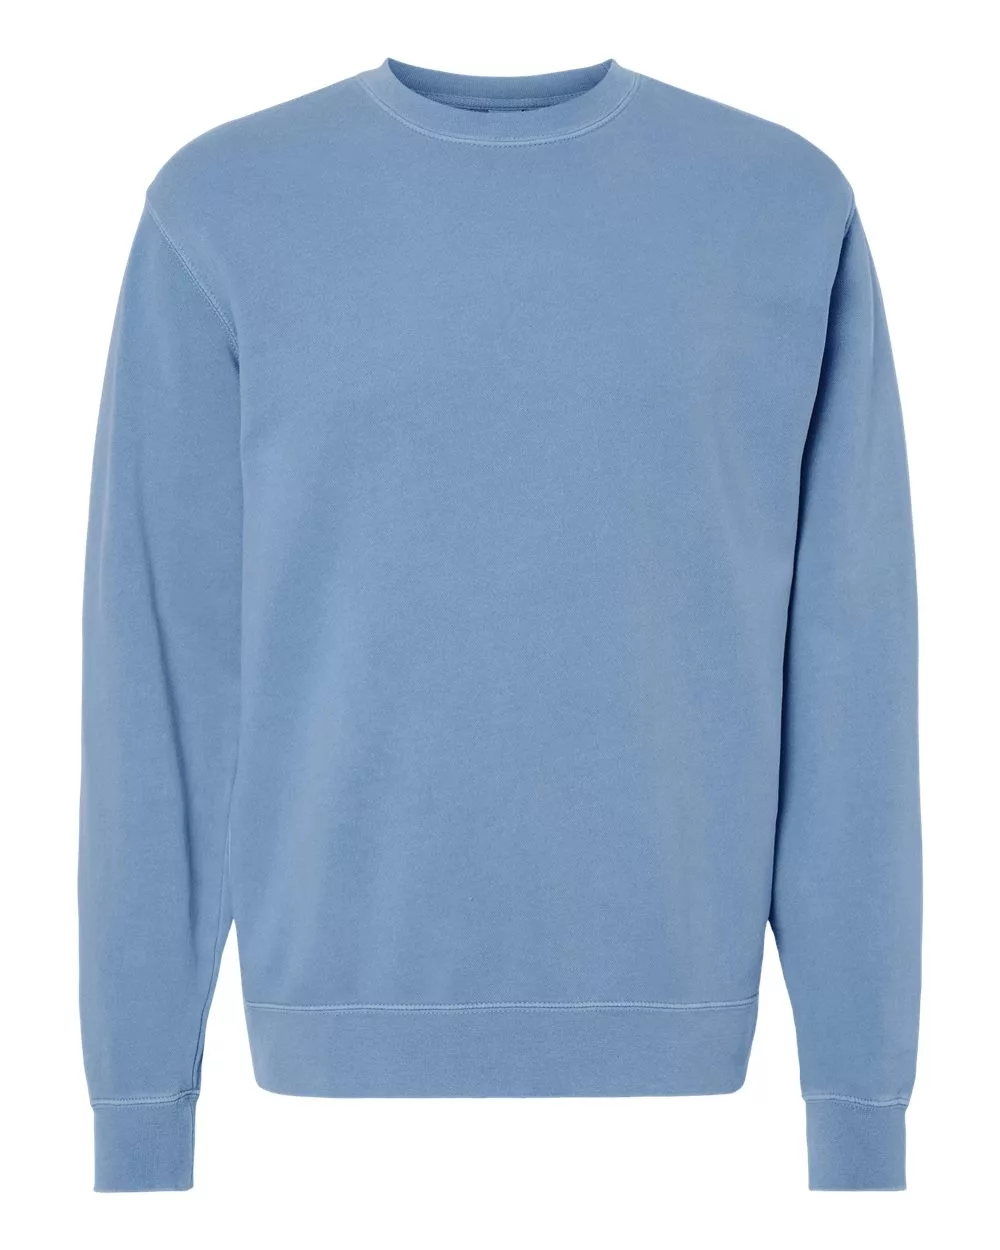 Independent Trading Co. Heavyweight Pigment-Dyed Crewneck